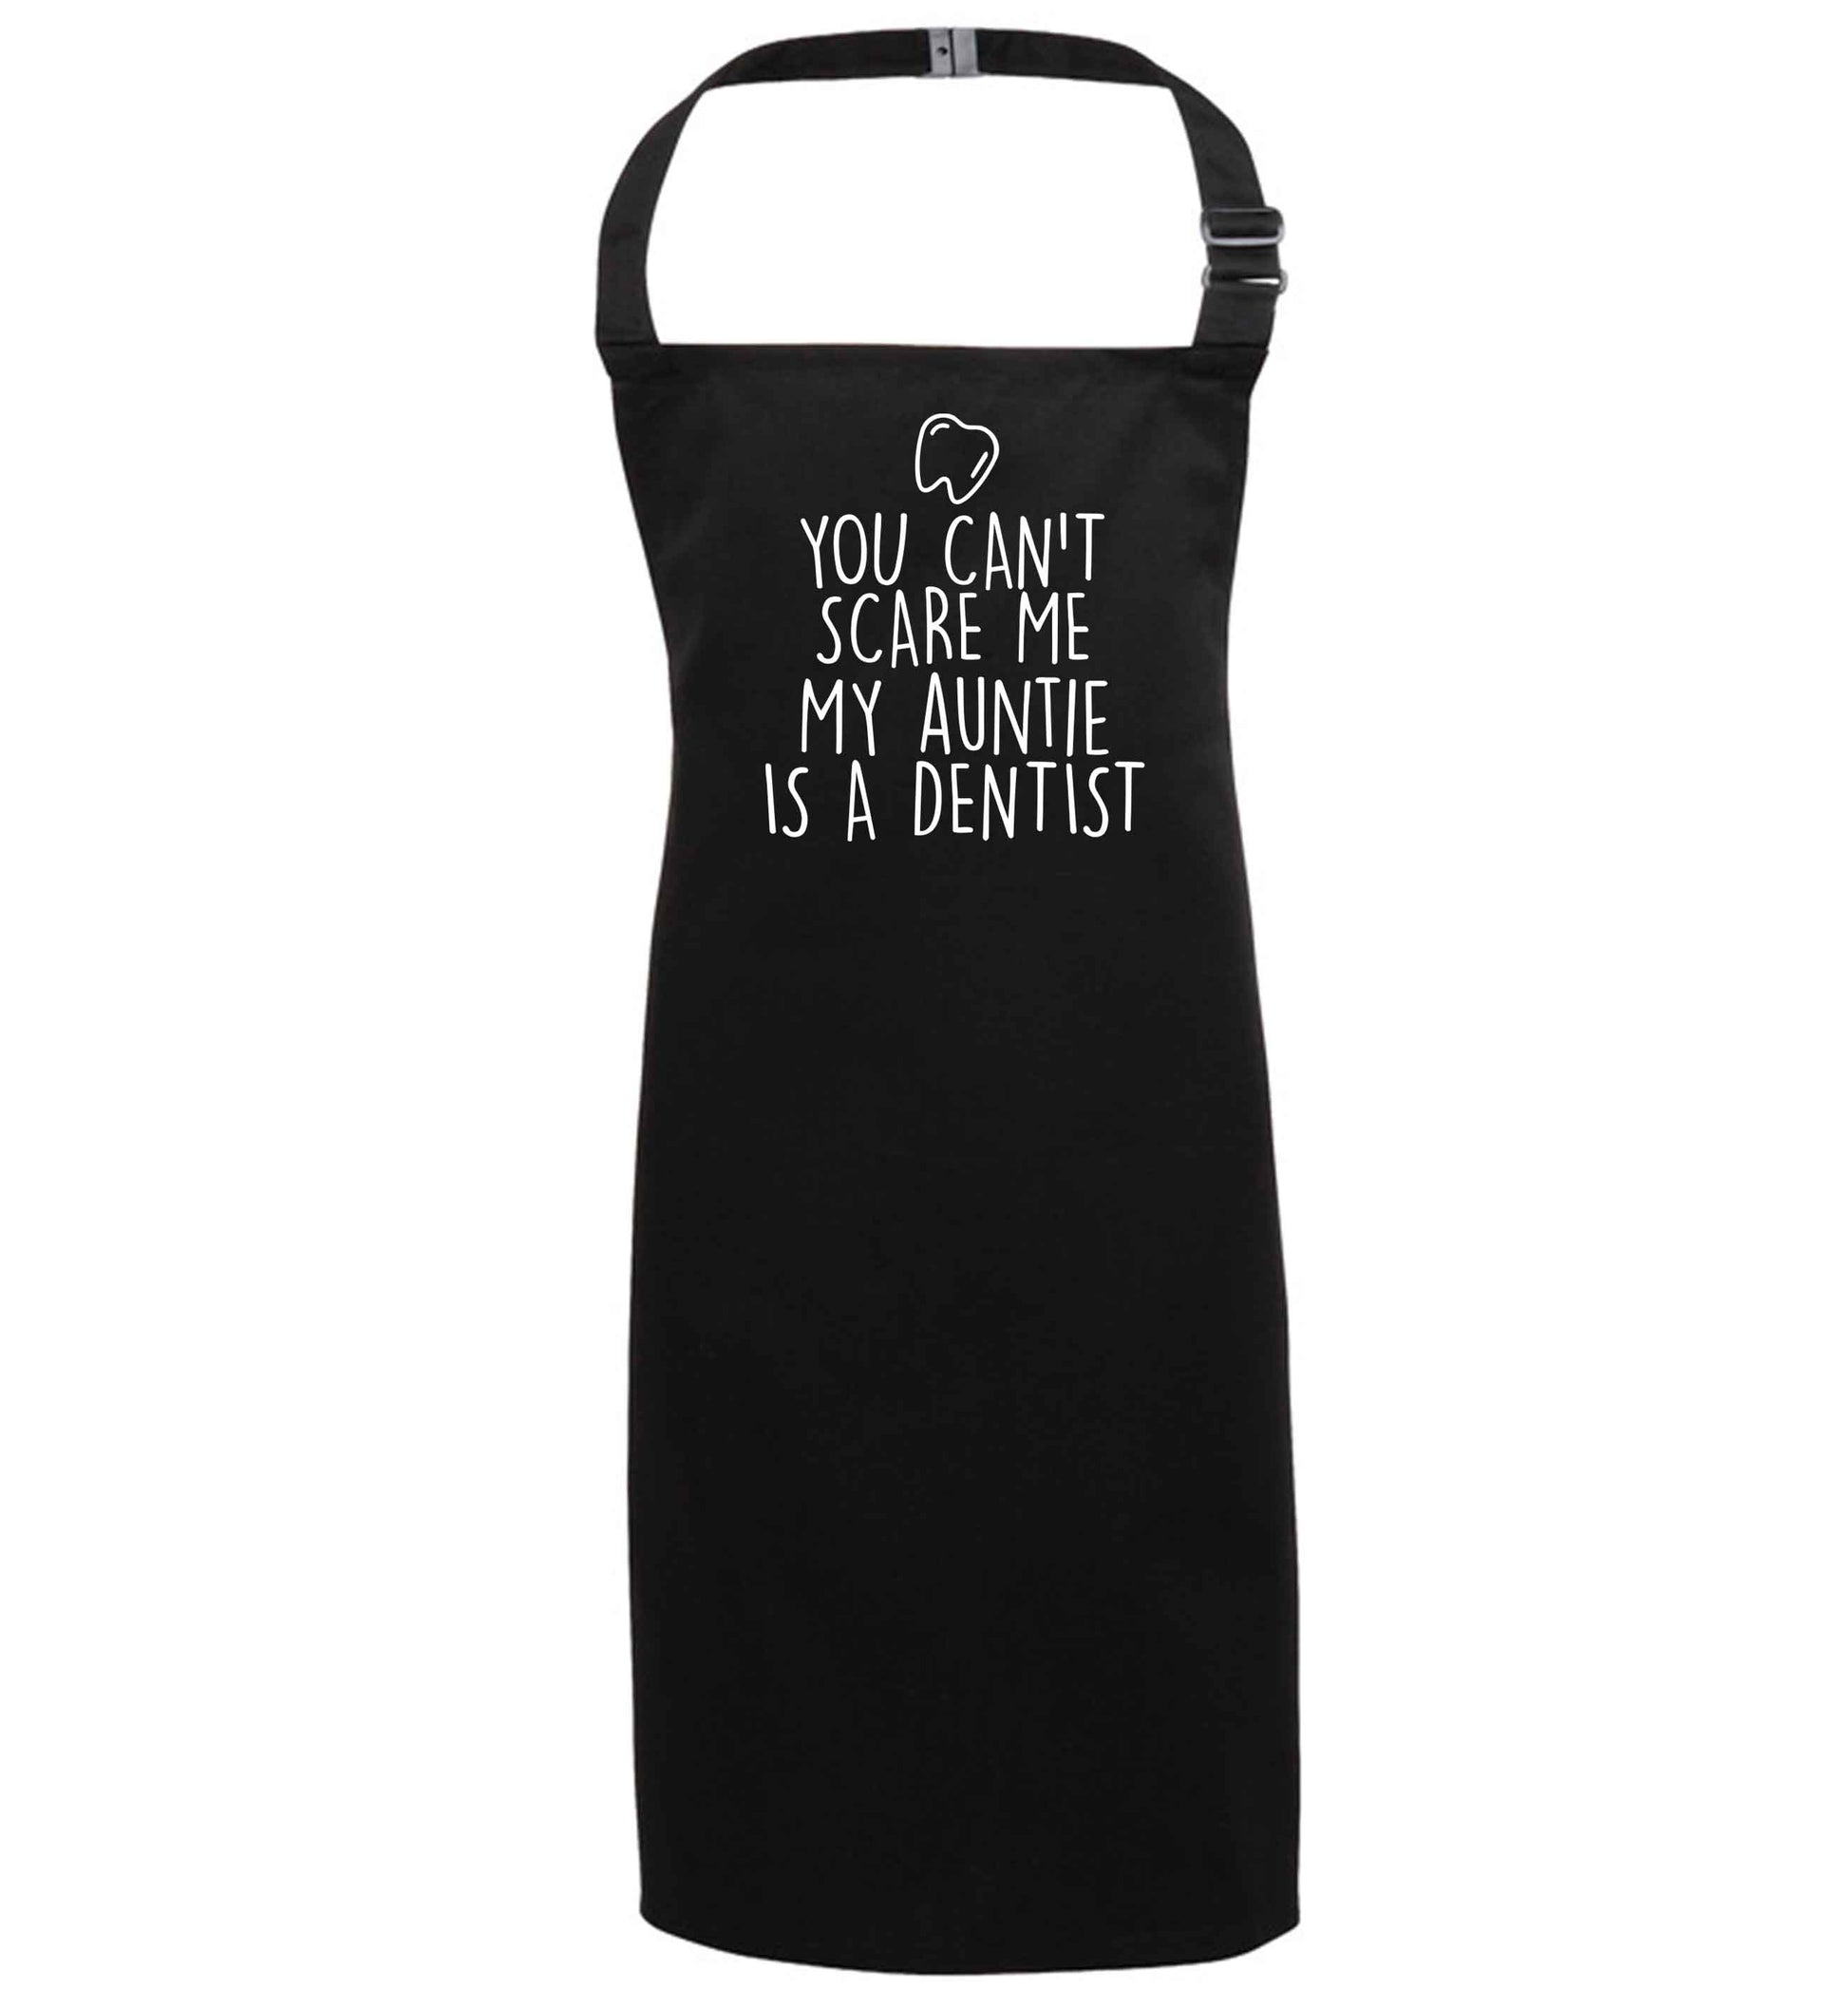 You can't scare me my auntie is a dentist black apron 7-10 years